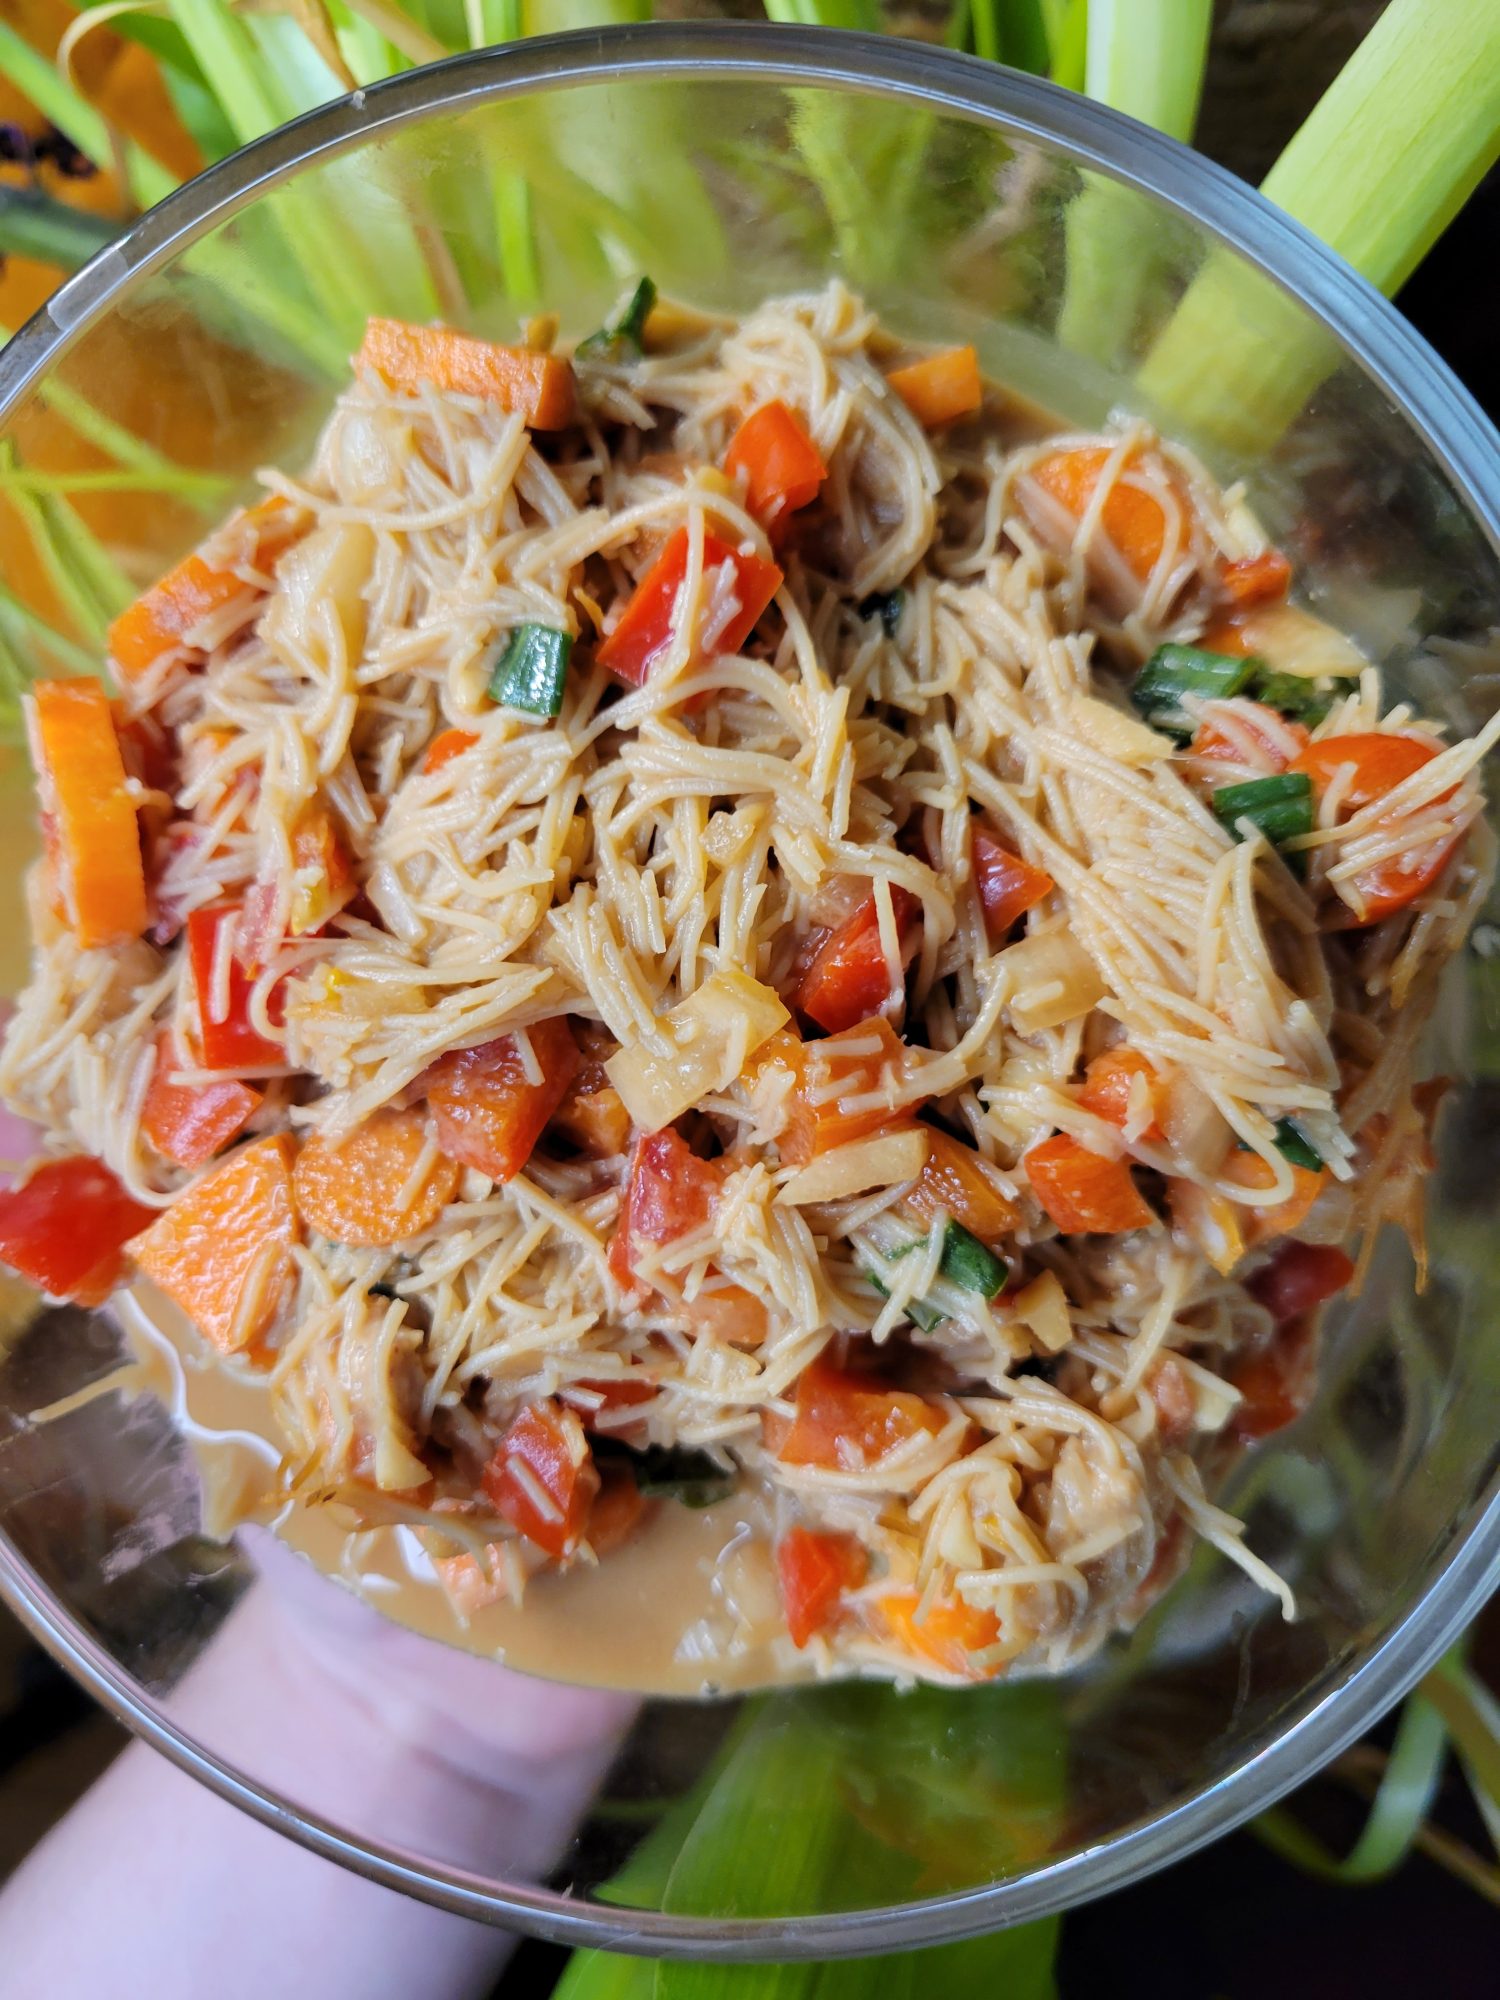 Vermicelli Salad w/ Carrots, Bell Peppers, & Scallions